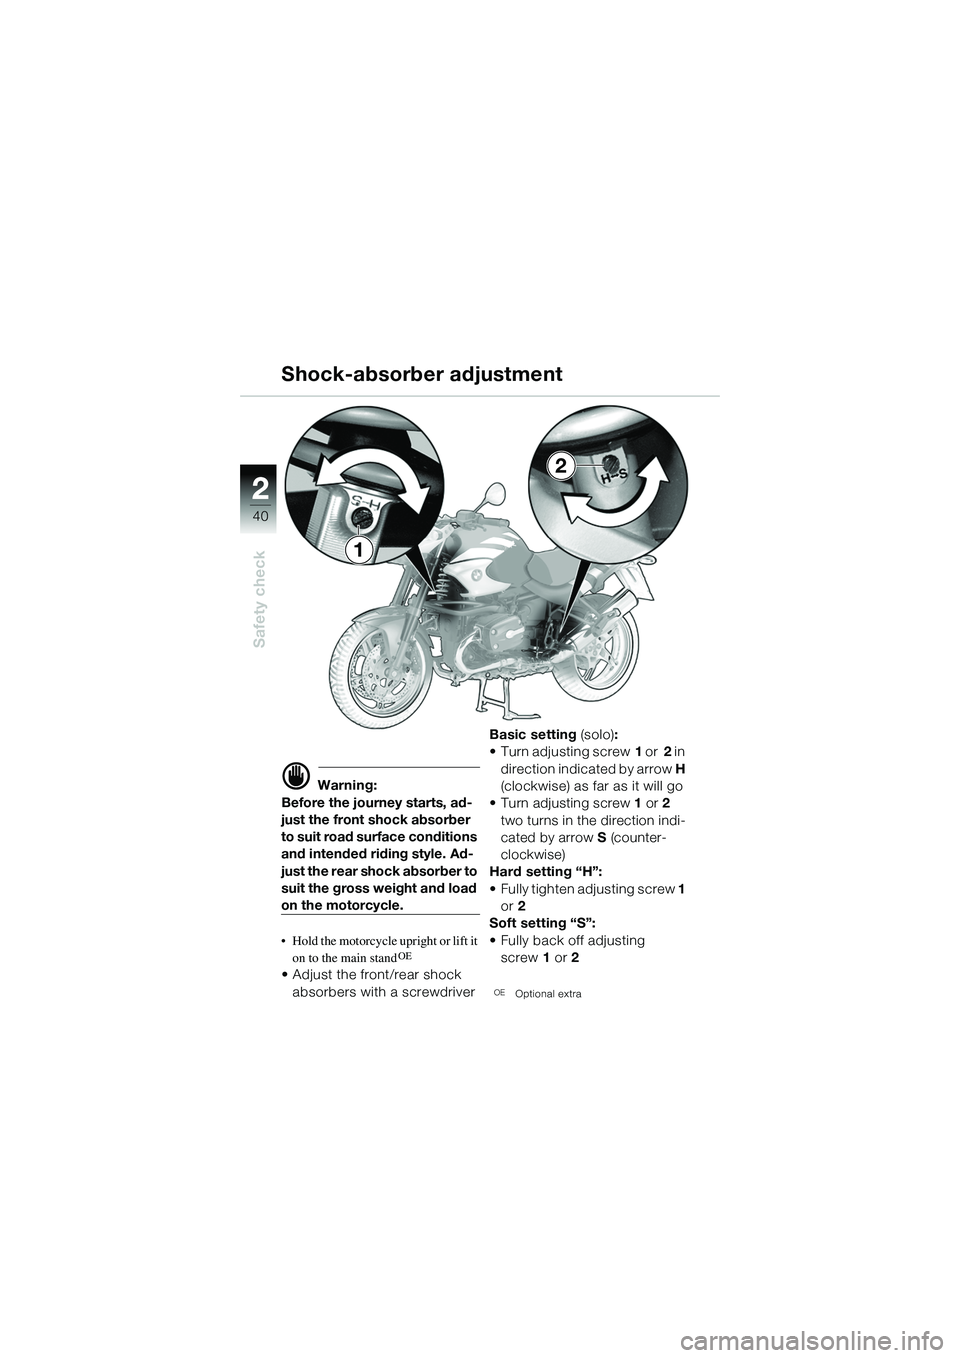 BMW MOTORRAD R 1150 R 2002  Riders Manual (in English) 22
40
Safety check
1
2
Shock-absorber adjustment 
d Warning:
Before the journey starts, ad-
just the front shock absorber 
to suit road surface conditions 
and intended riding style. Ad-
just the rear